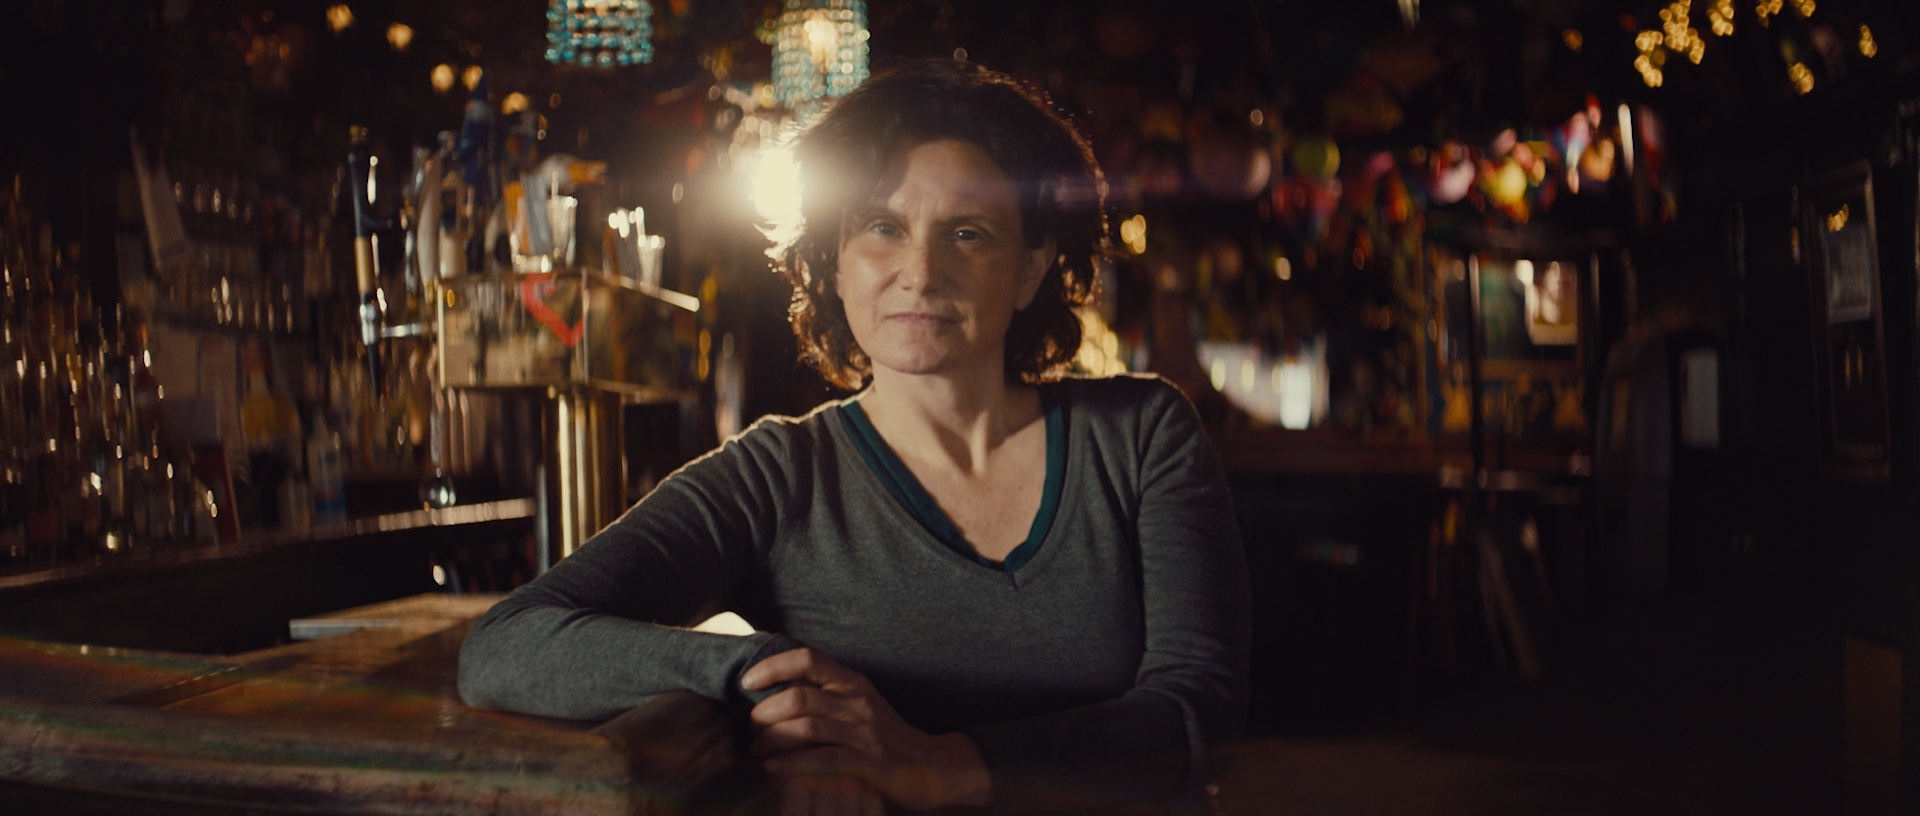 The Lesbian Bar Project sets Docuseries Premiere Date and Launches Promo Tour